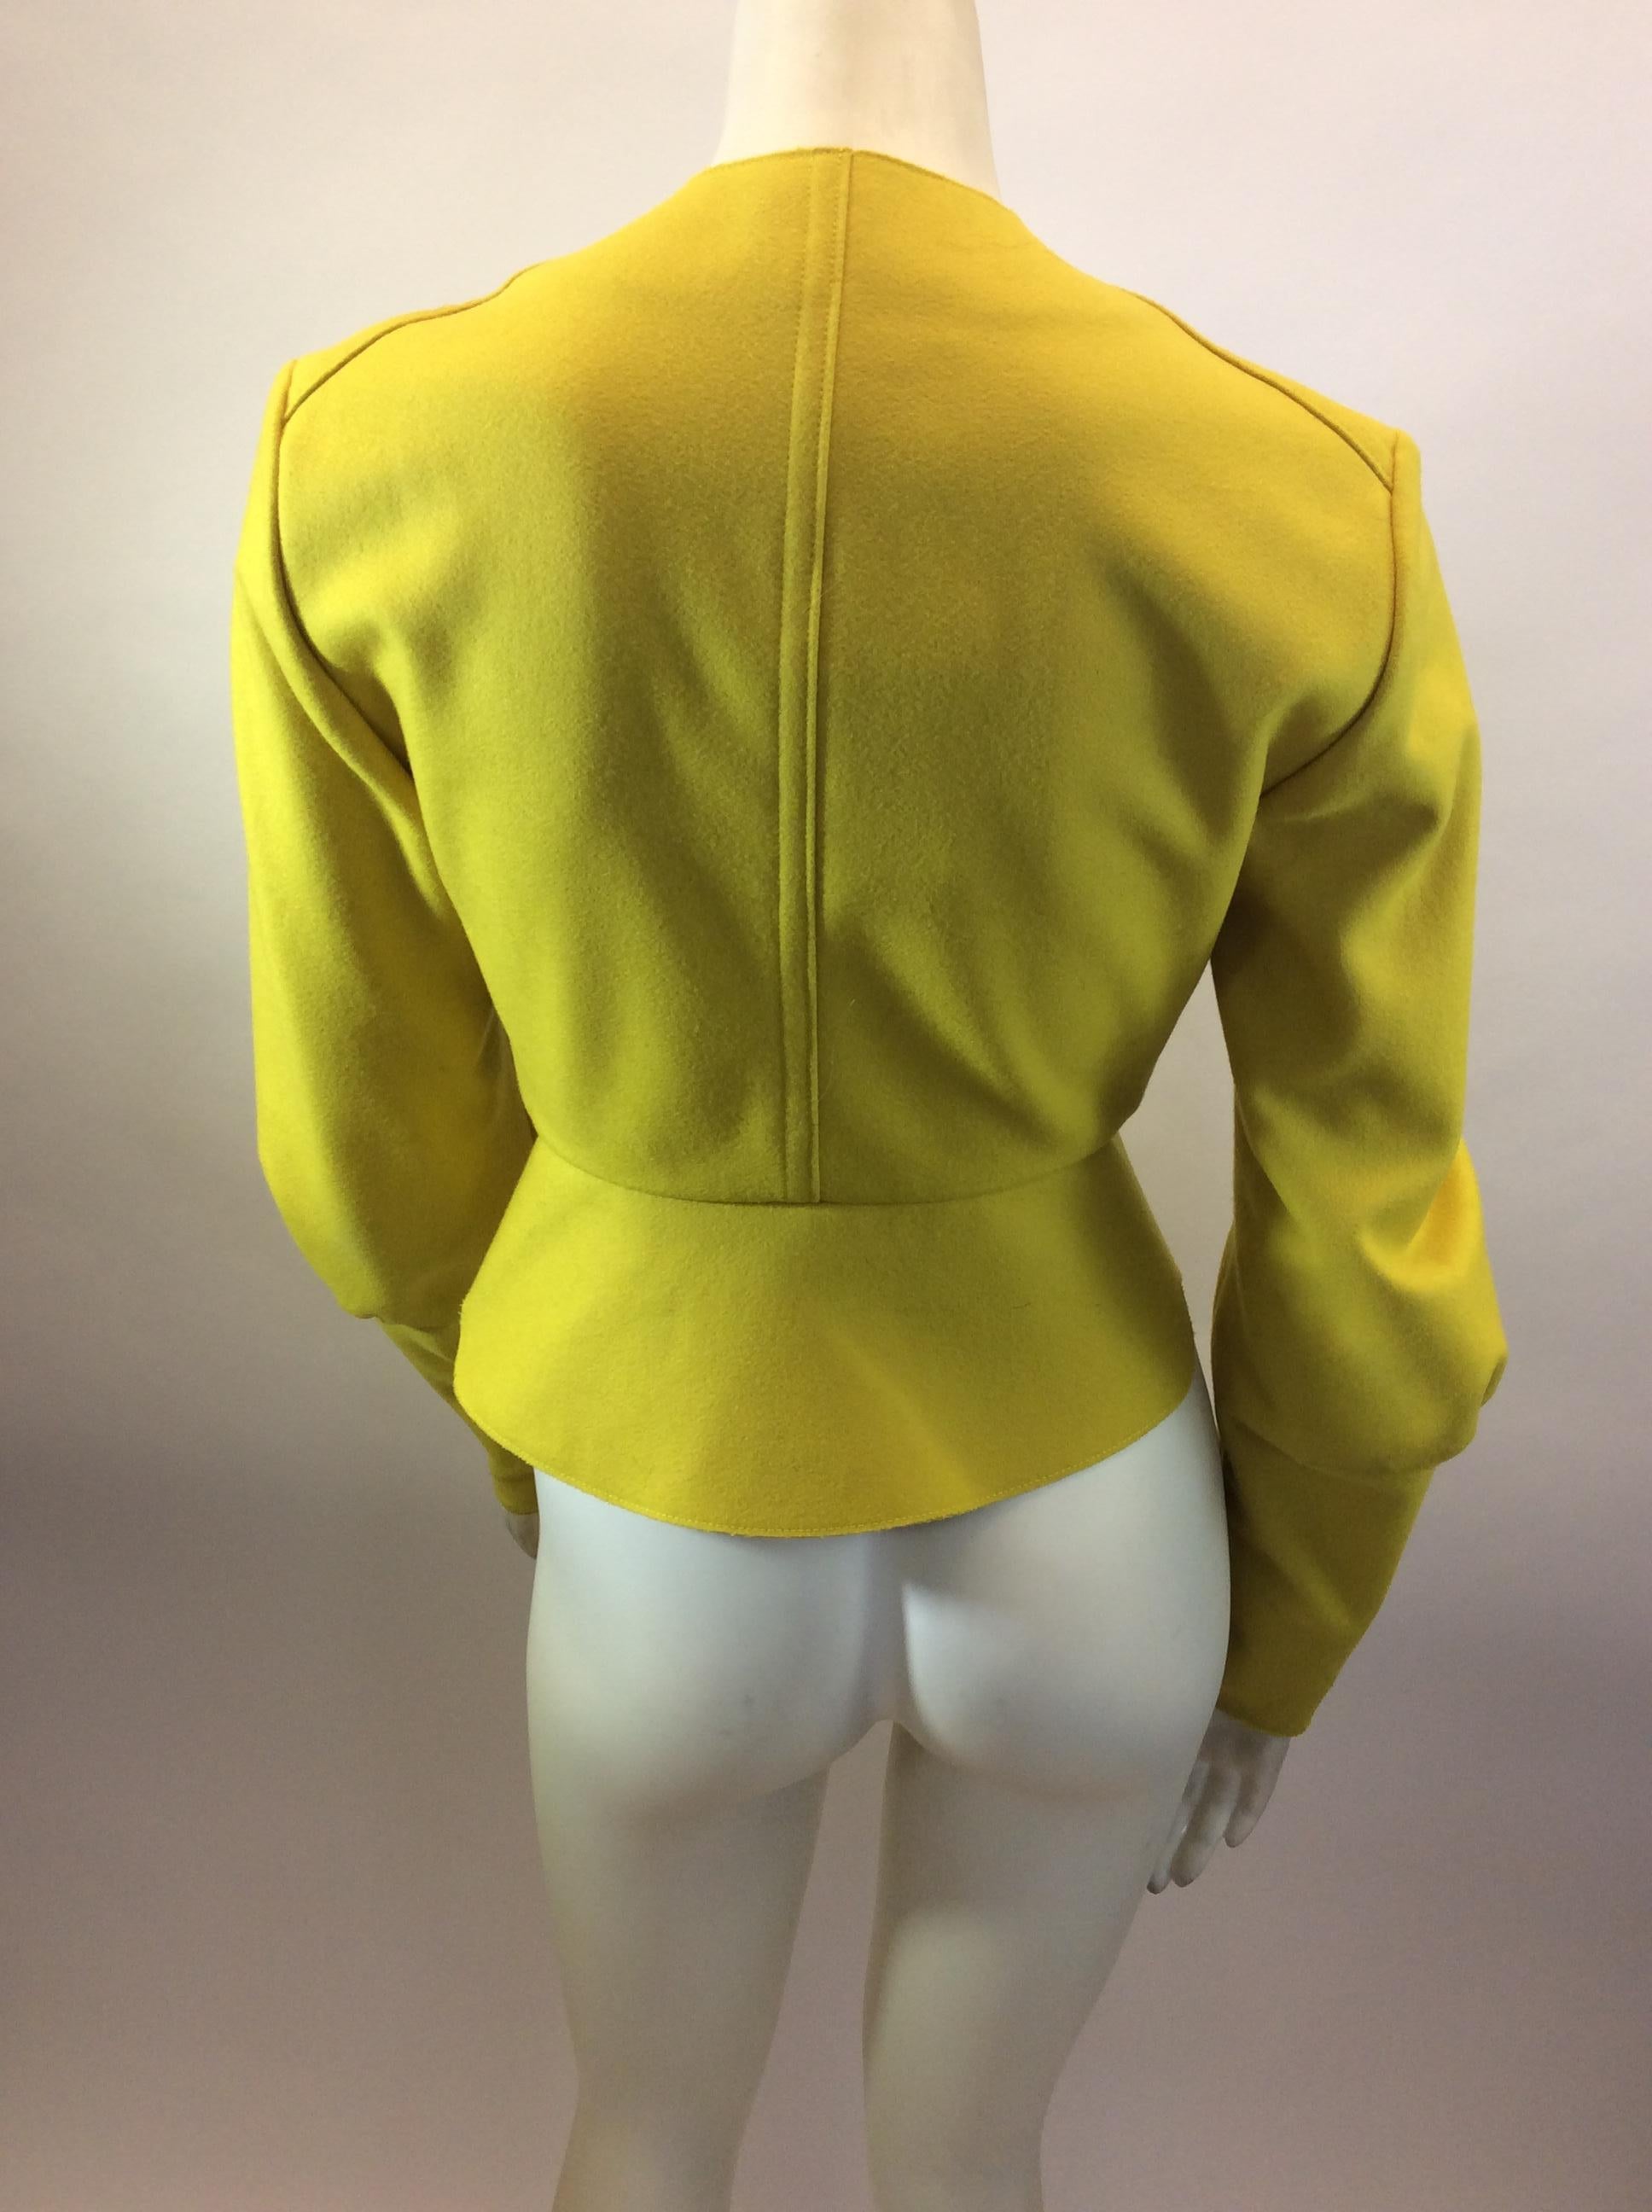 Yves Saint Laurent Yellow Wool Jacket  In New Condition For Sale In Narberth, PA